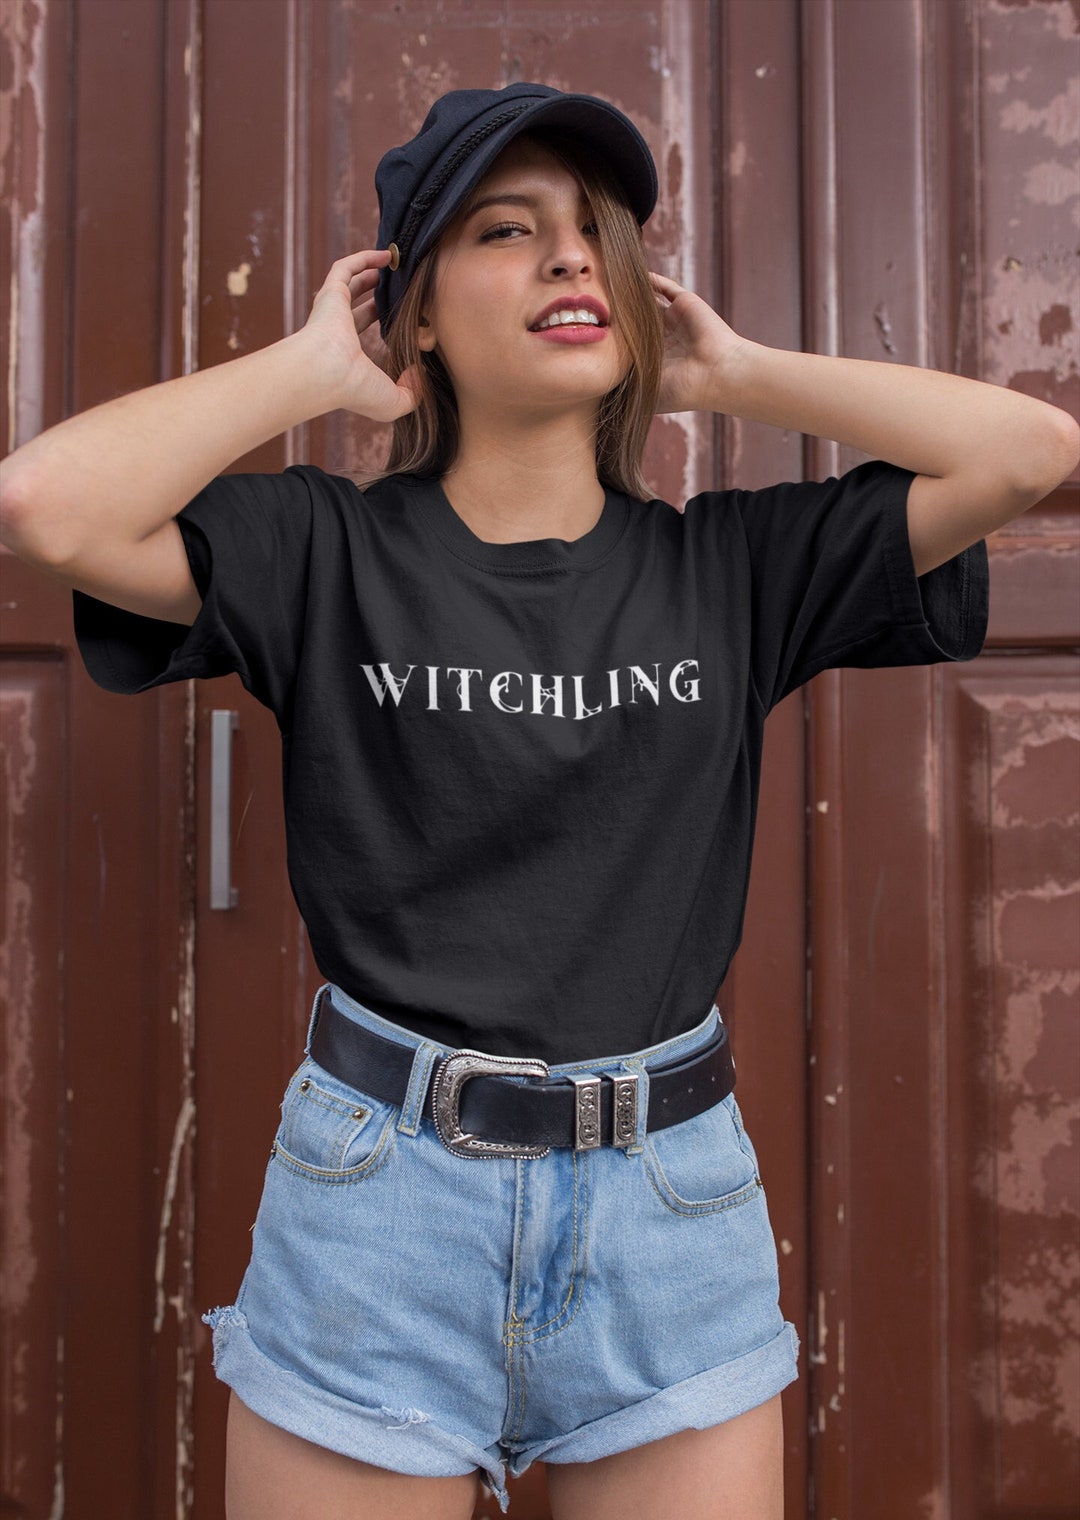 Witchling Shirt Throne of Glass Witch Shirt Bookish Sarah - Etsy